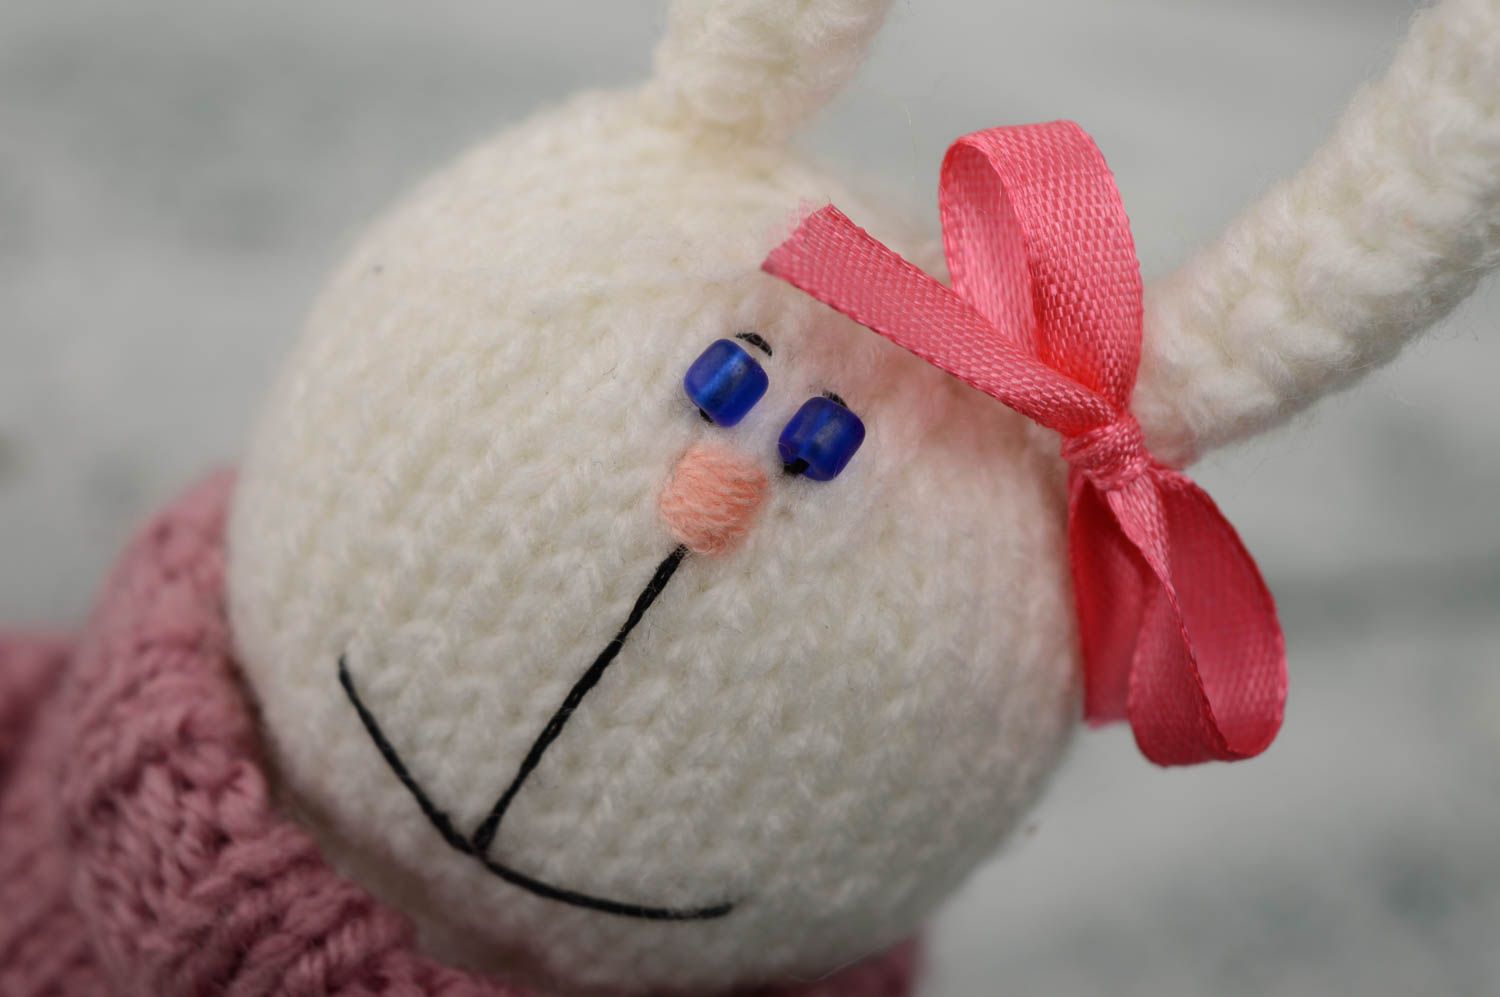 Handmade soft knitted toy photo 2